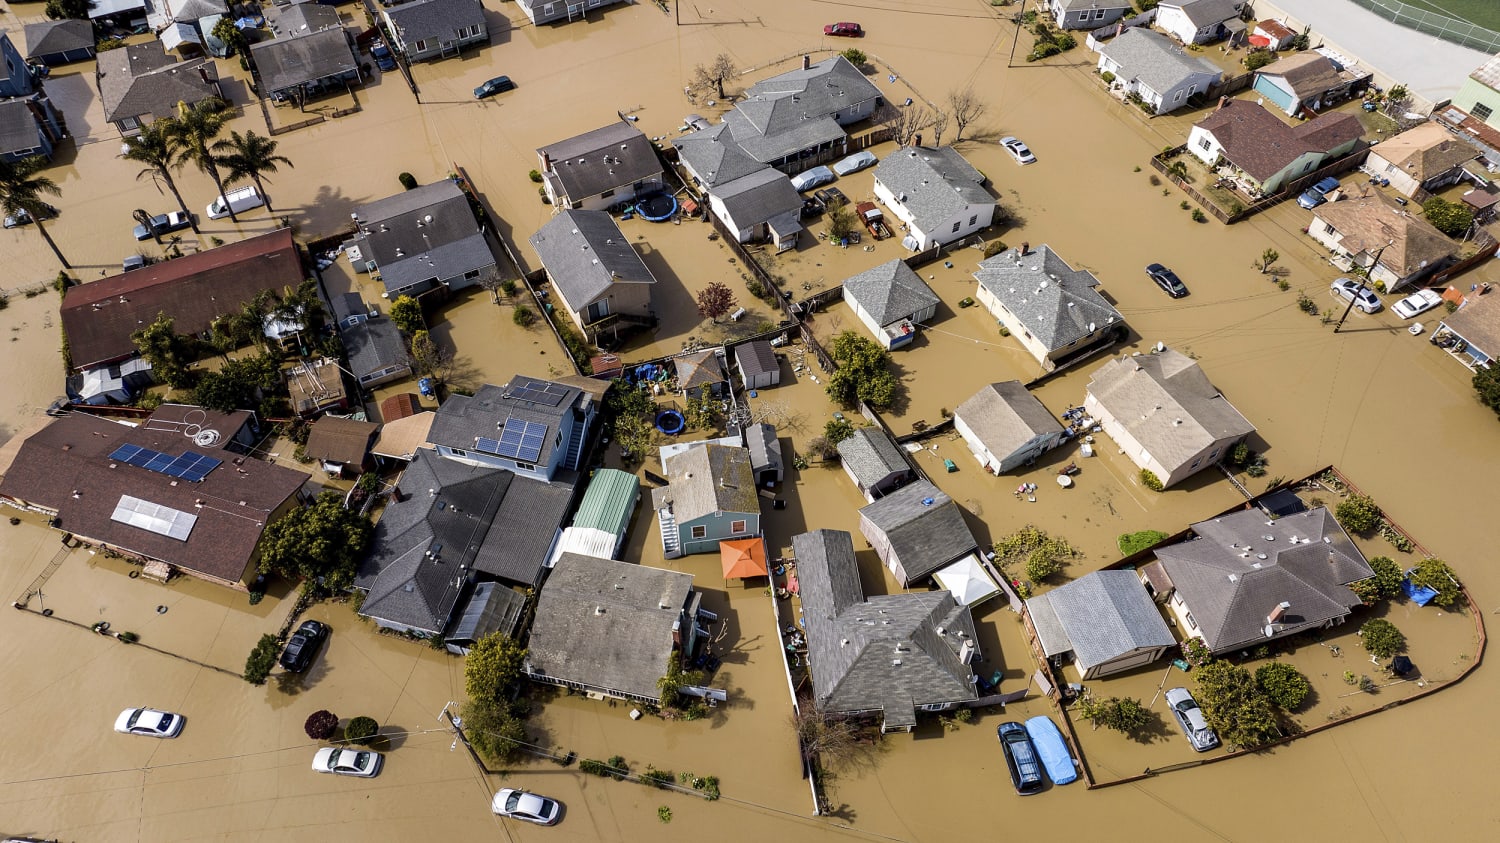 California braces for 'catastrophic' floods as East and West coasts face 'double whammy' of storms